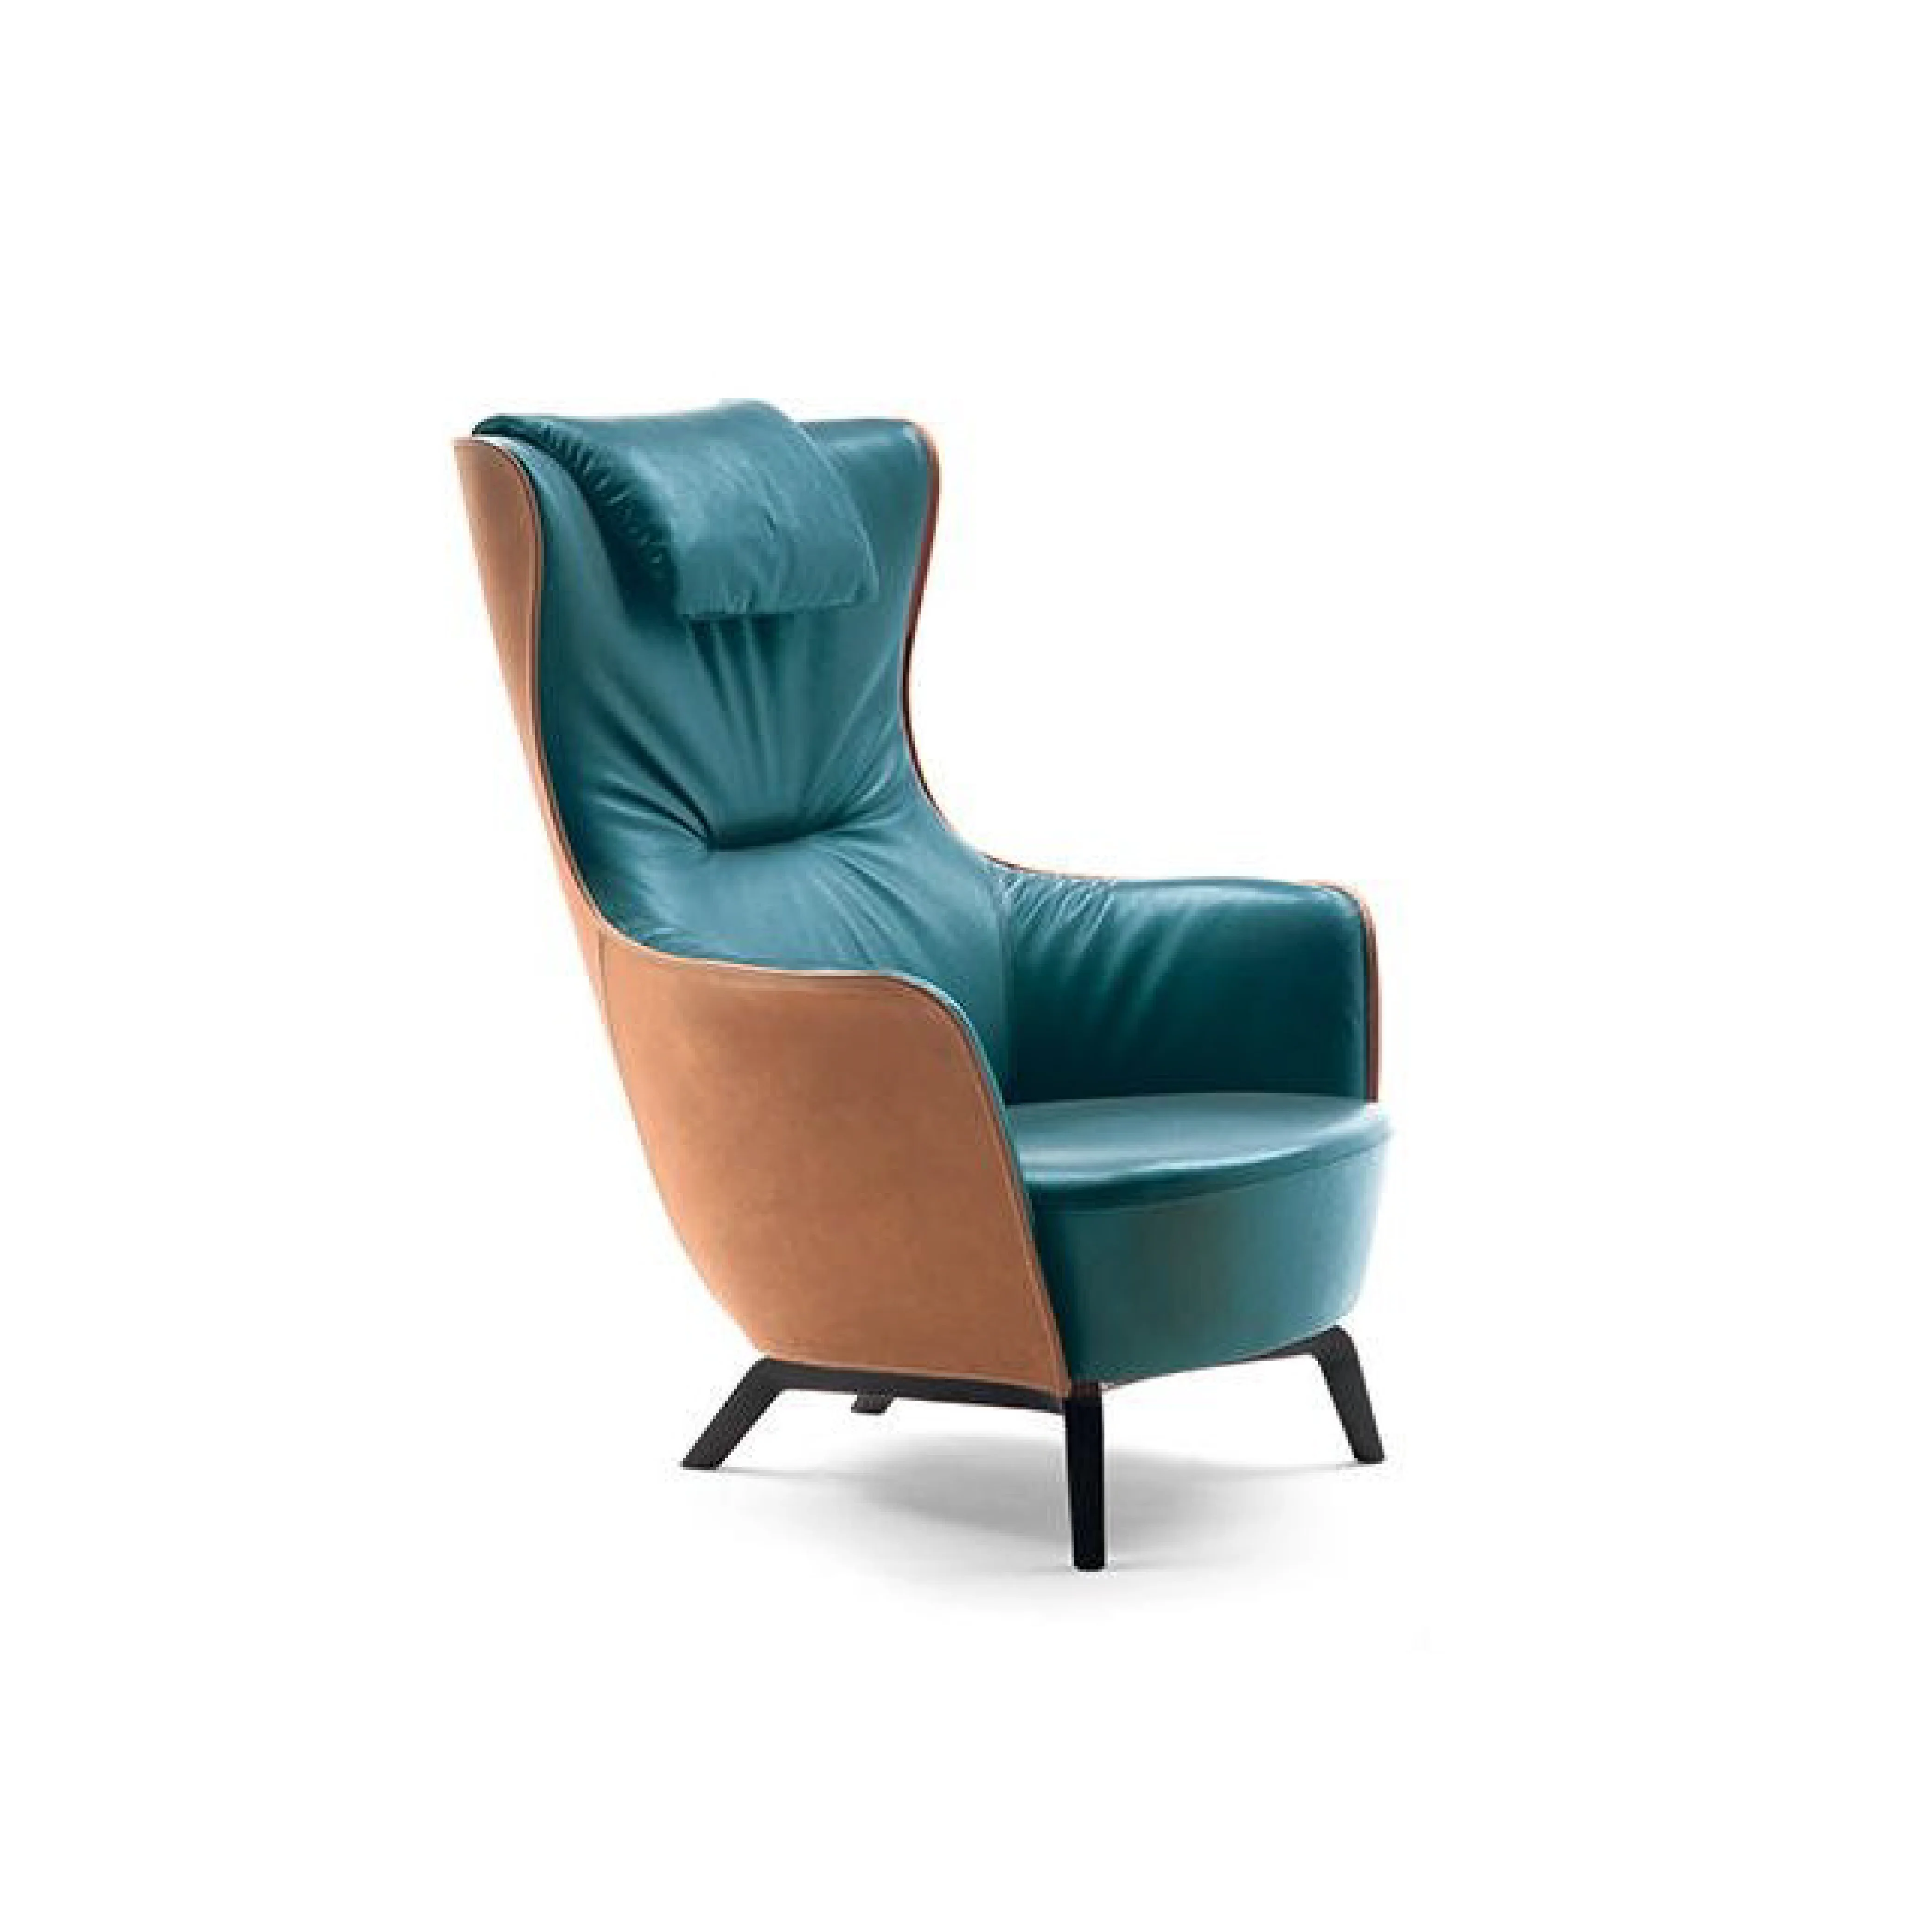 Brand New Classic High End Soft Single Teal Blue Leather Armchair Buy Comfortable Modern Luxury Baroque Royal Fancy Lazy Wing Sofa Chair